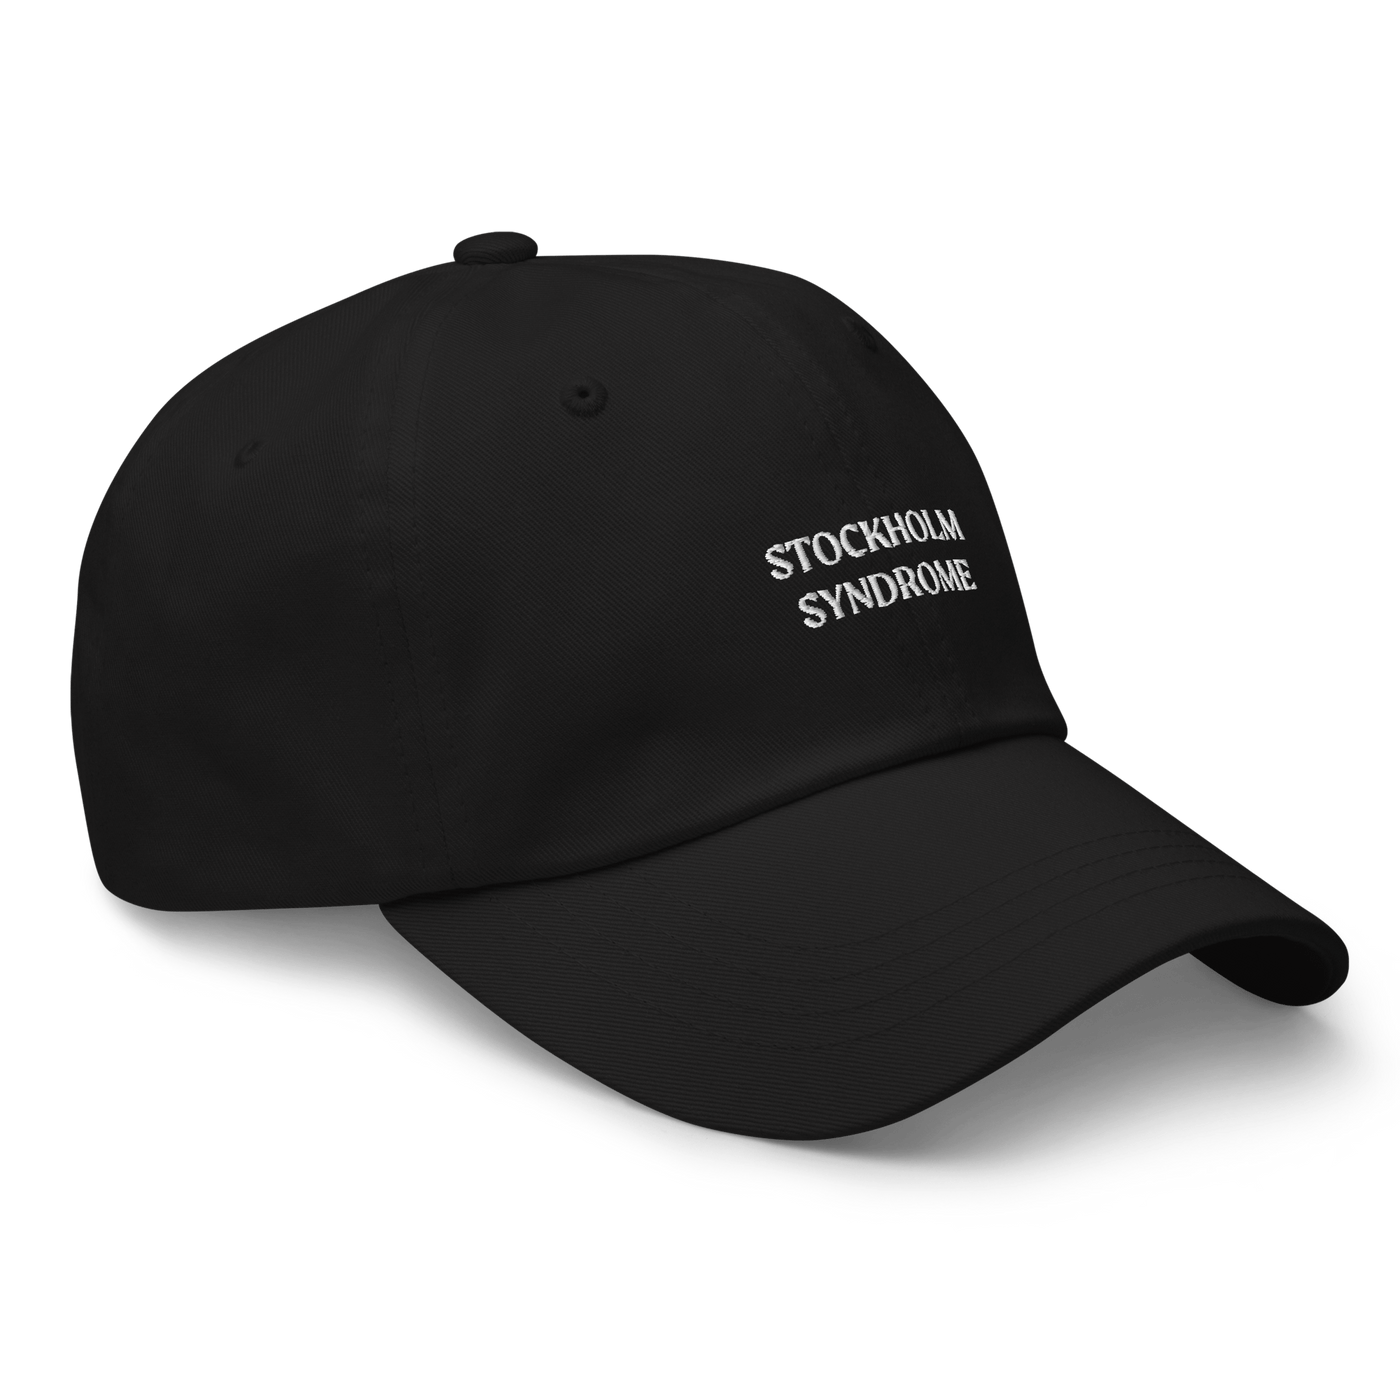 Stockholm Syndrome Dad hat - Black - - Just Another Cap Store